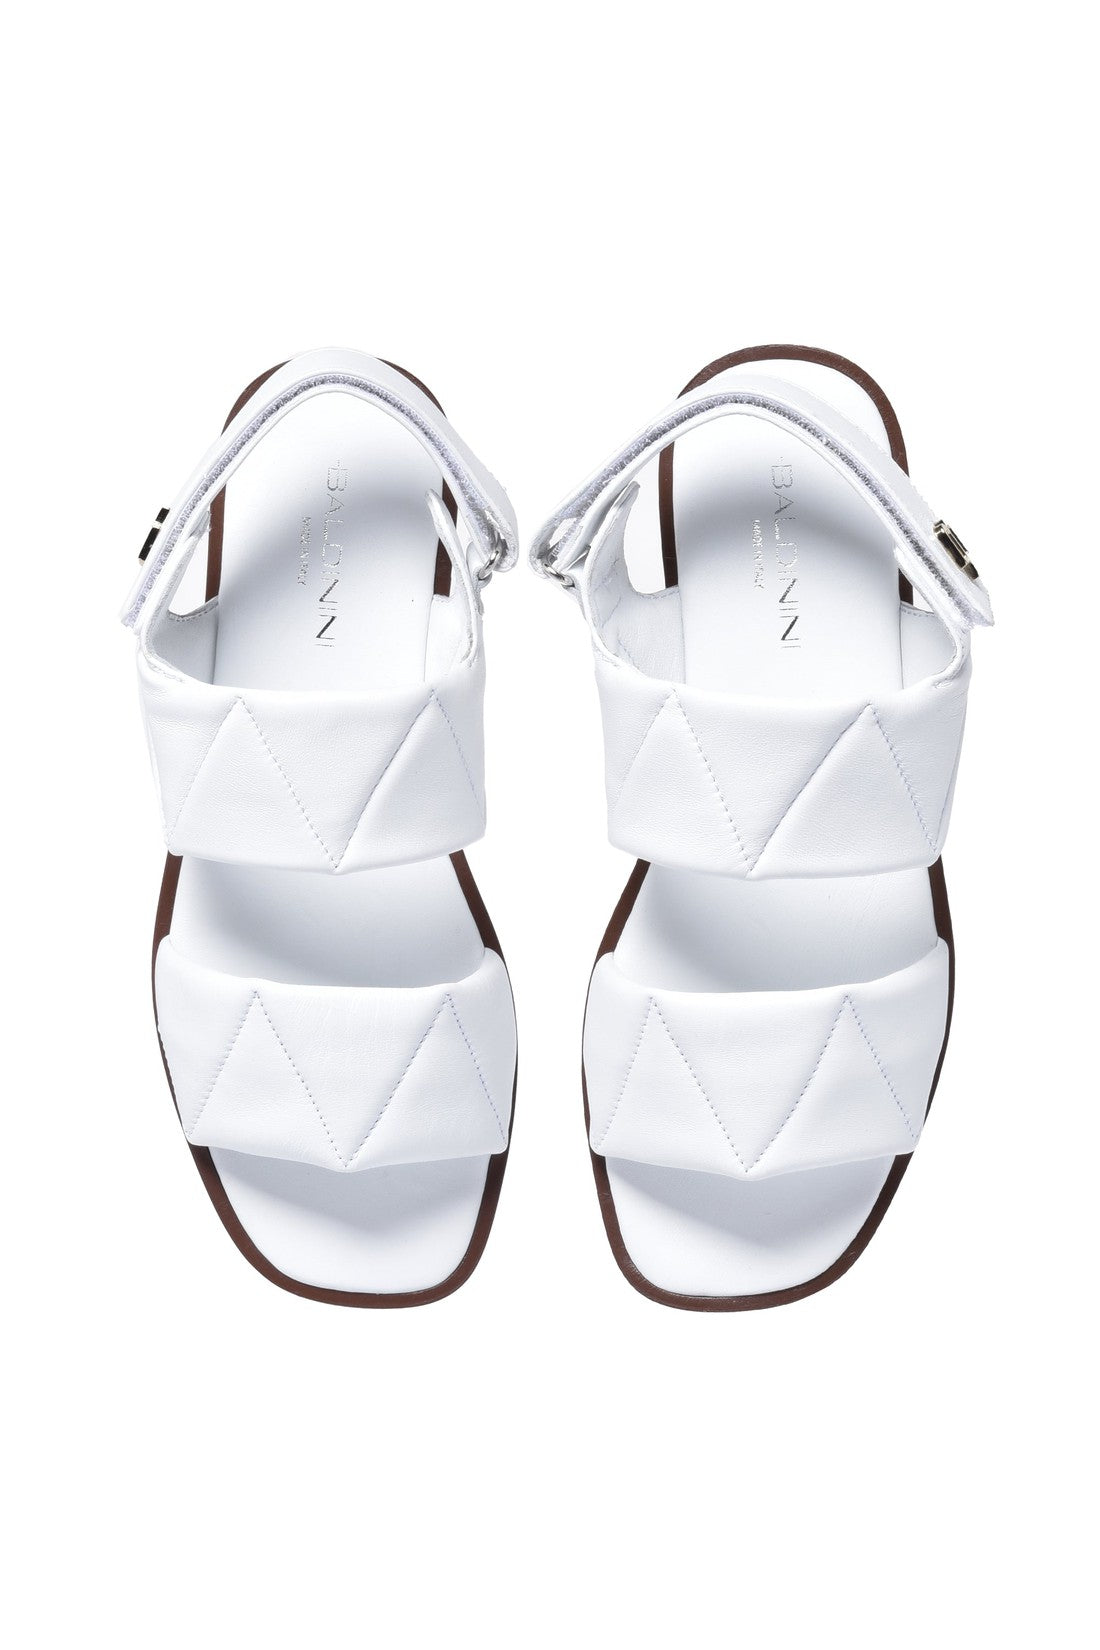 BALDININI-OUTLET-SALE-Sandal-in-white-quilted-leather-Sandalen-ARCHIVE-COLLECTION-2.jpg